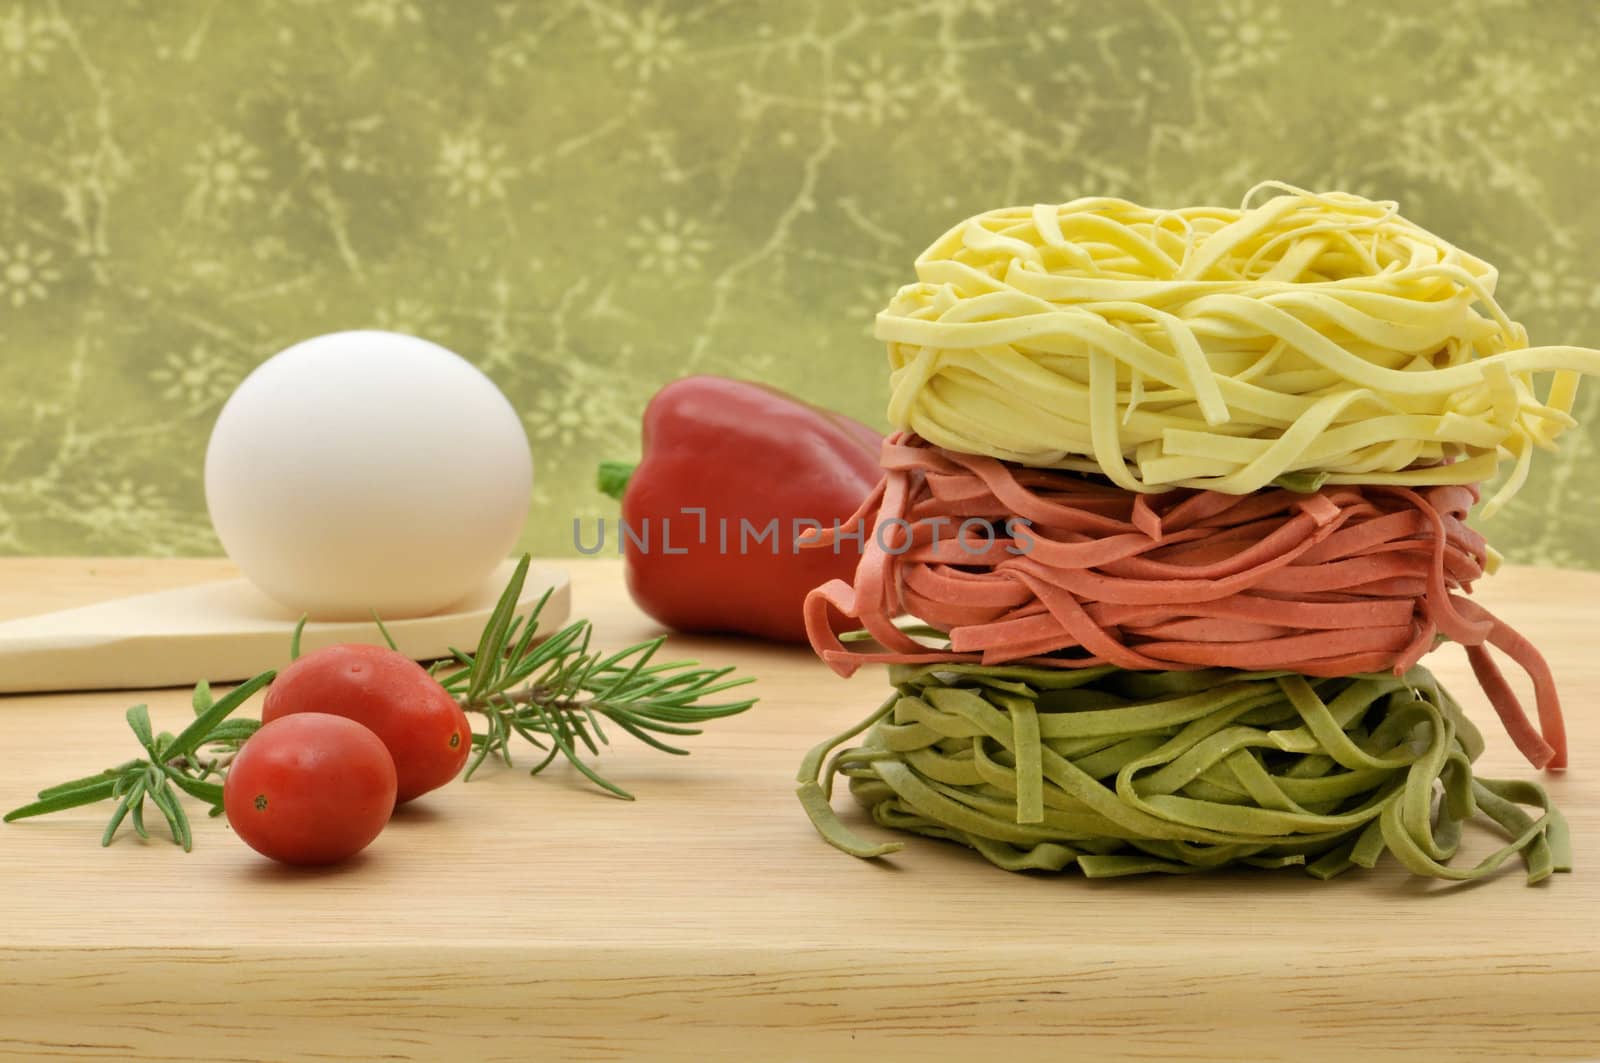 Fresh Italian pasta nests with red pepper, tomatoes, egg and rosemary ready to cook